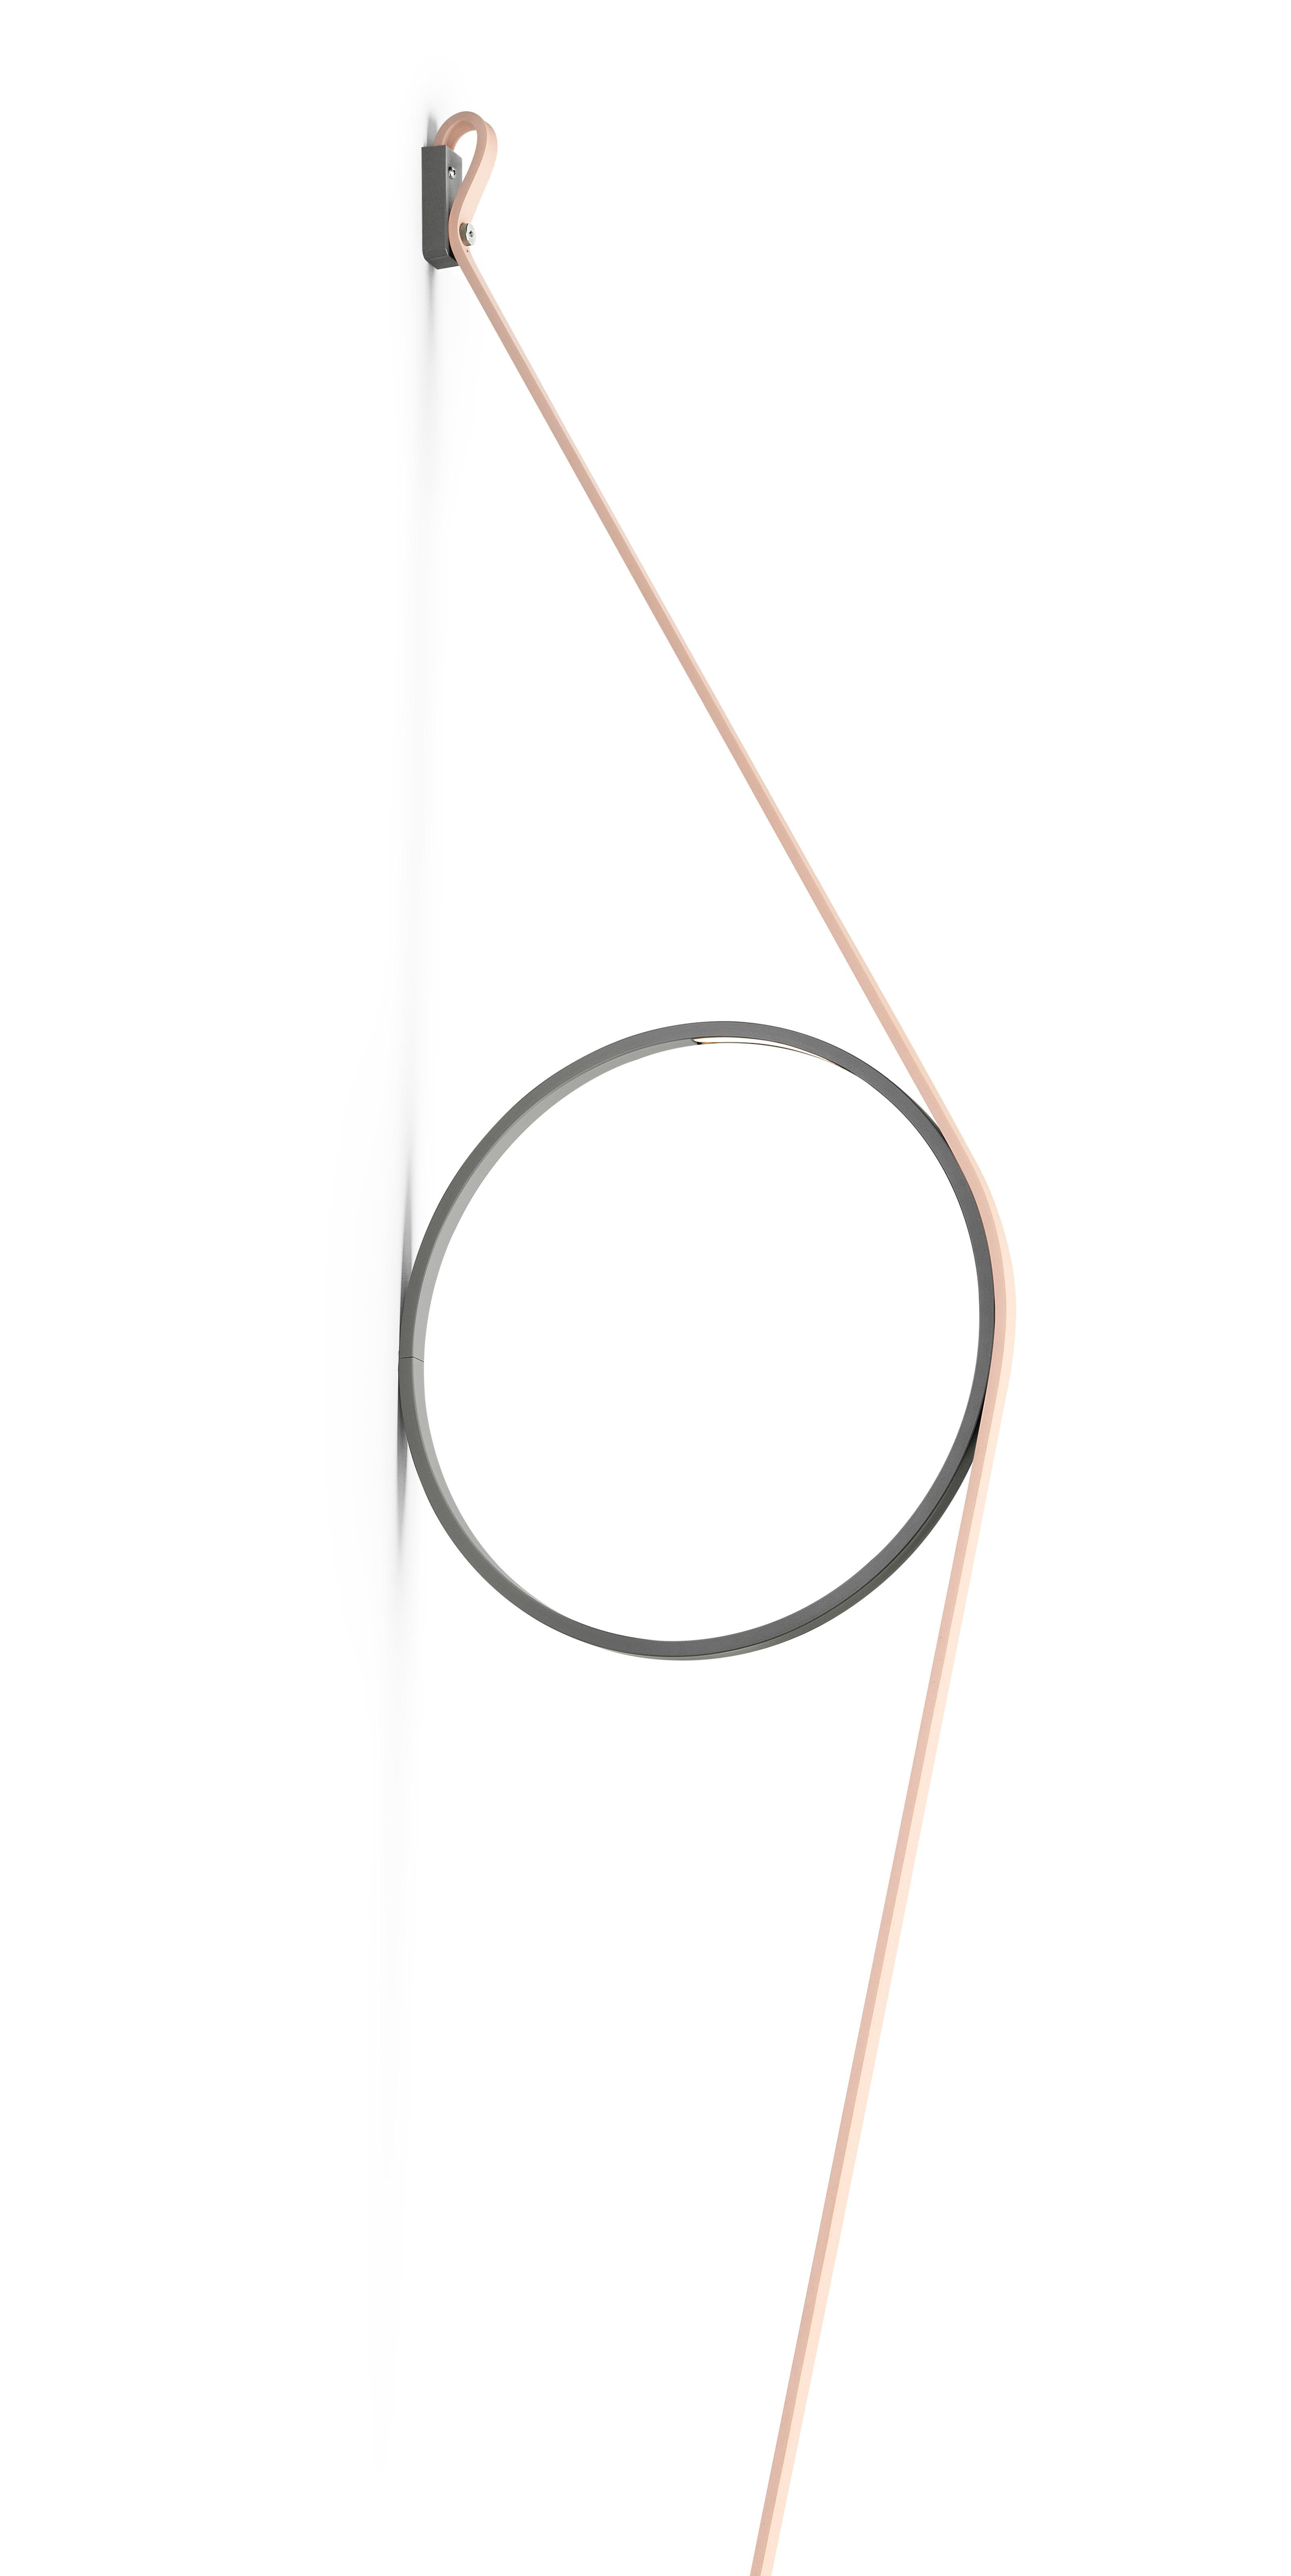 An exercise in reduction, stripped back to its most essential elements, offering beautifully rendered light. The wire holds a simple ring fitted with an LED strip. The cable and ring are available in different color combinations and a range of